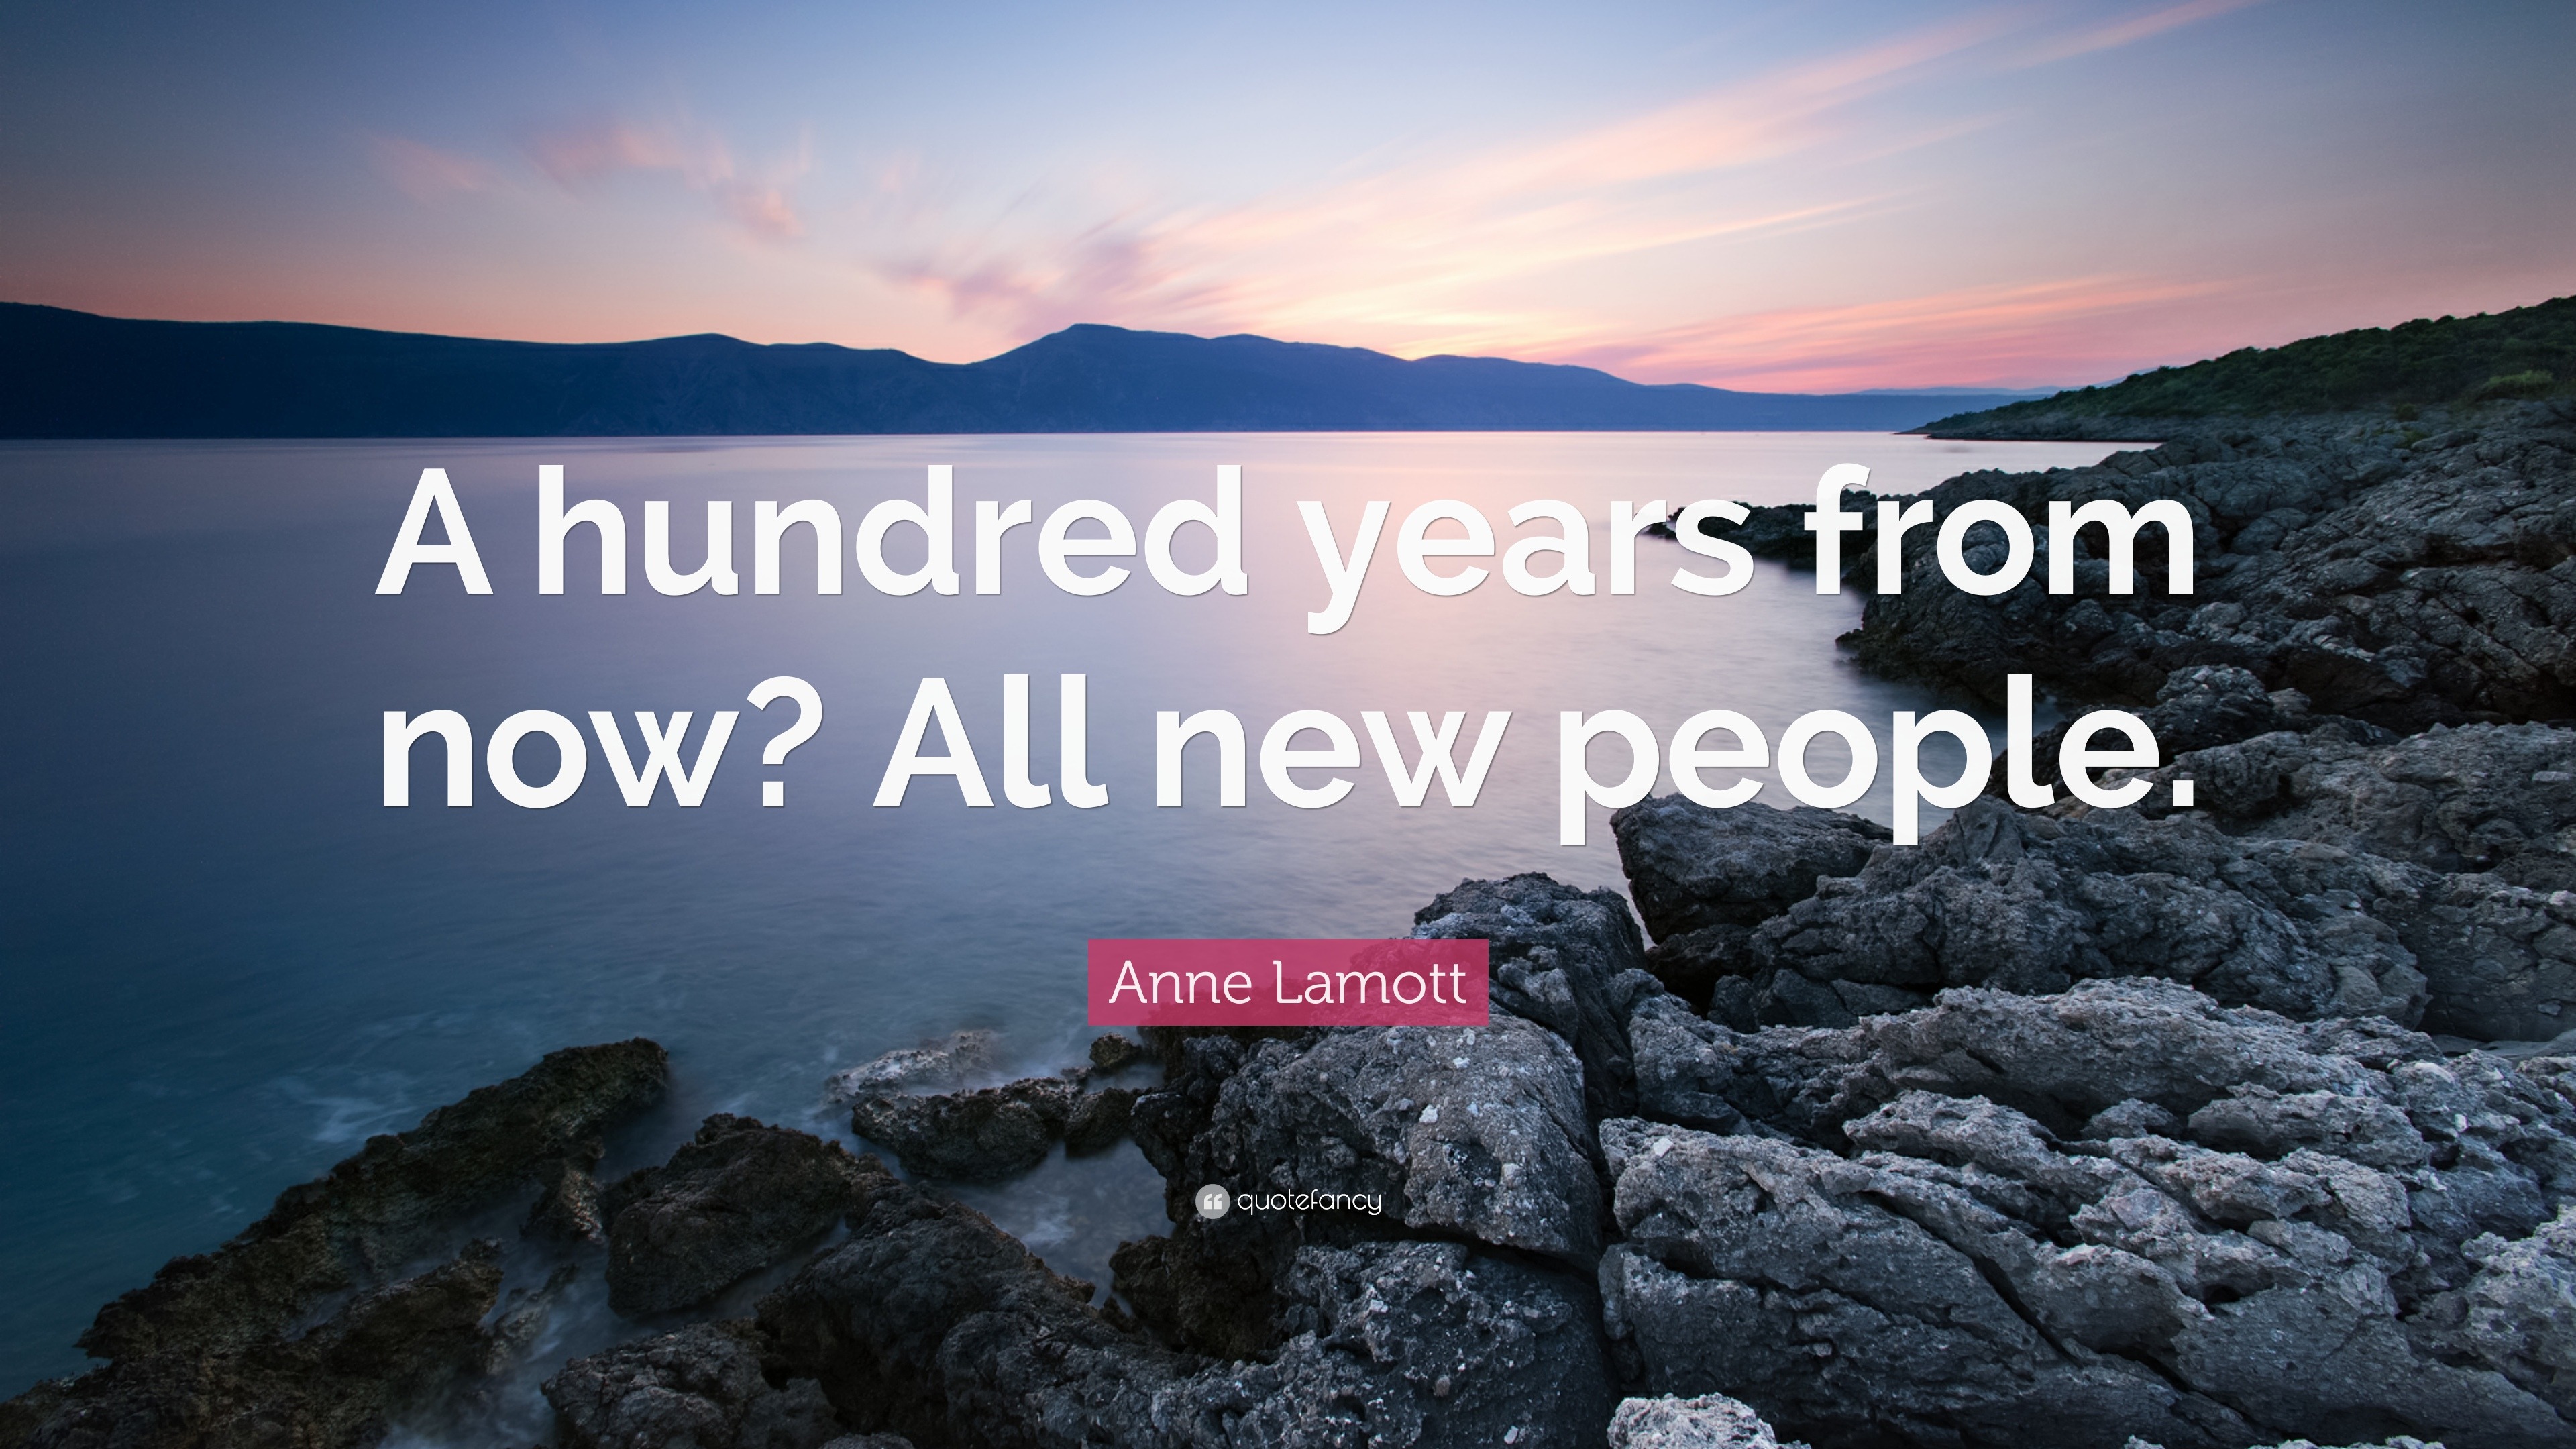 Anne Lamott Quote “A hundred years from now? All new people.”